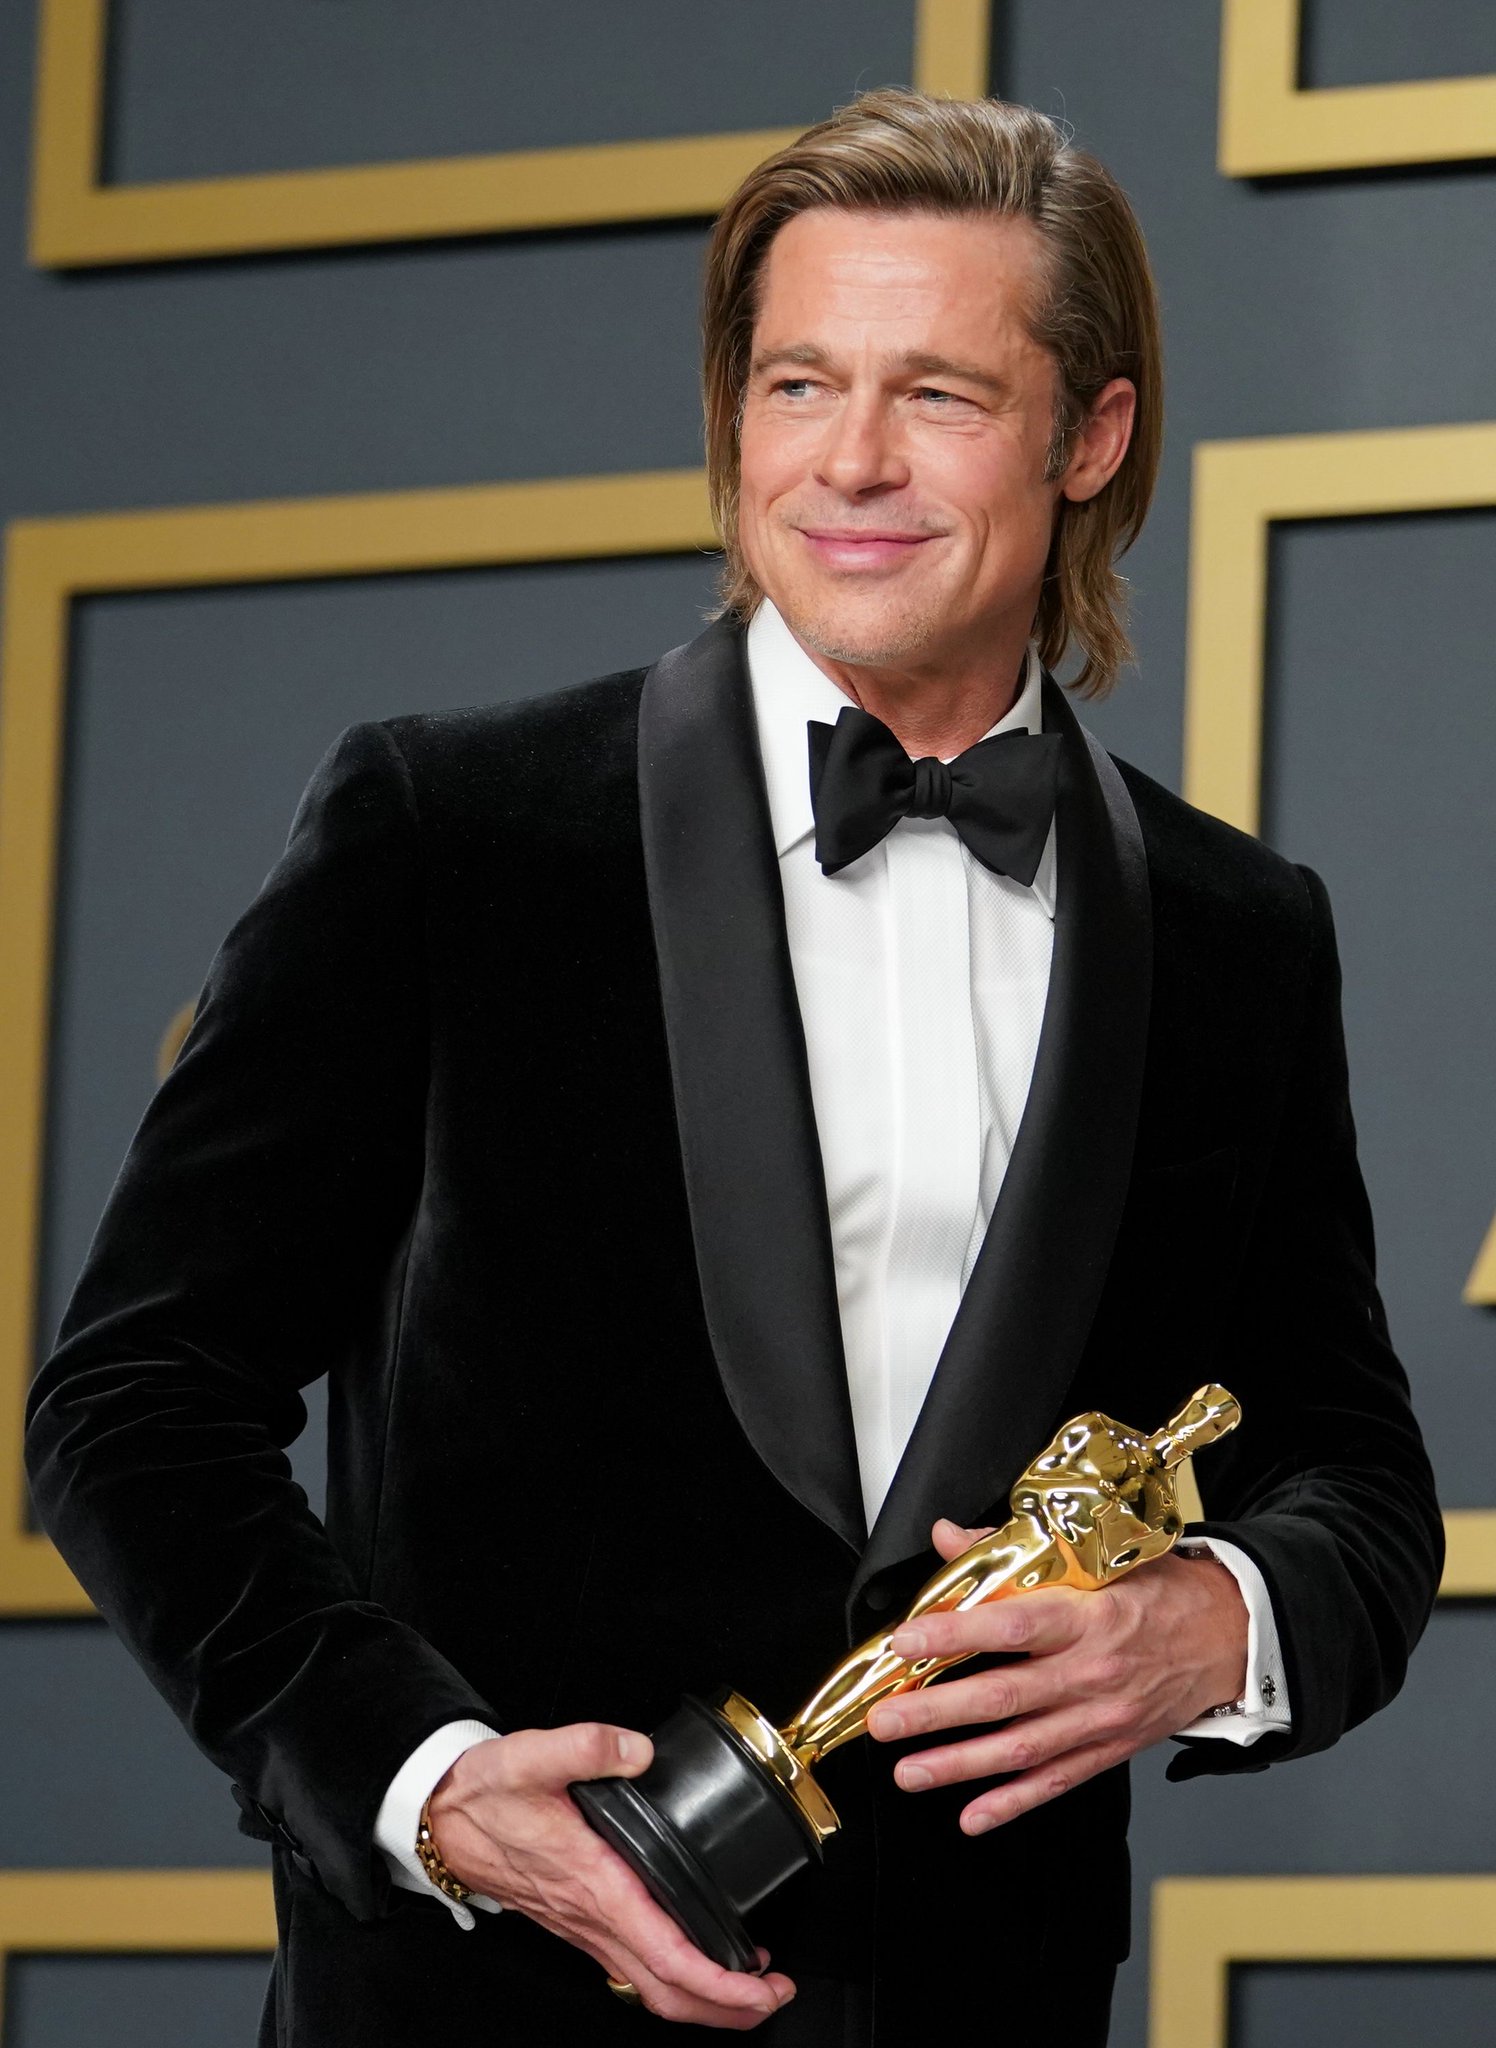 Happy birthday to Brad Pitt! What are your top five films and performances from the two-time Oscar winner? 